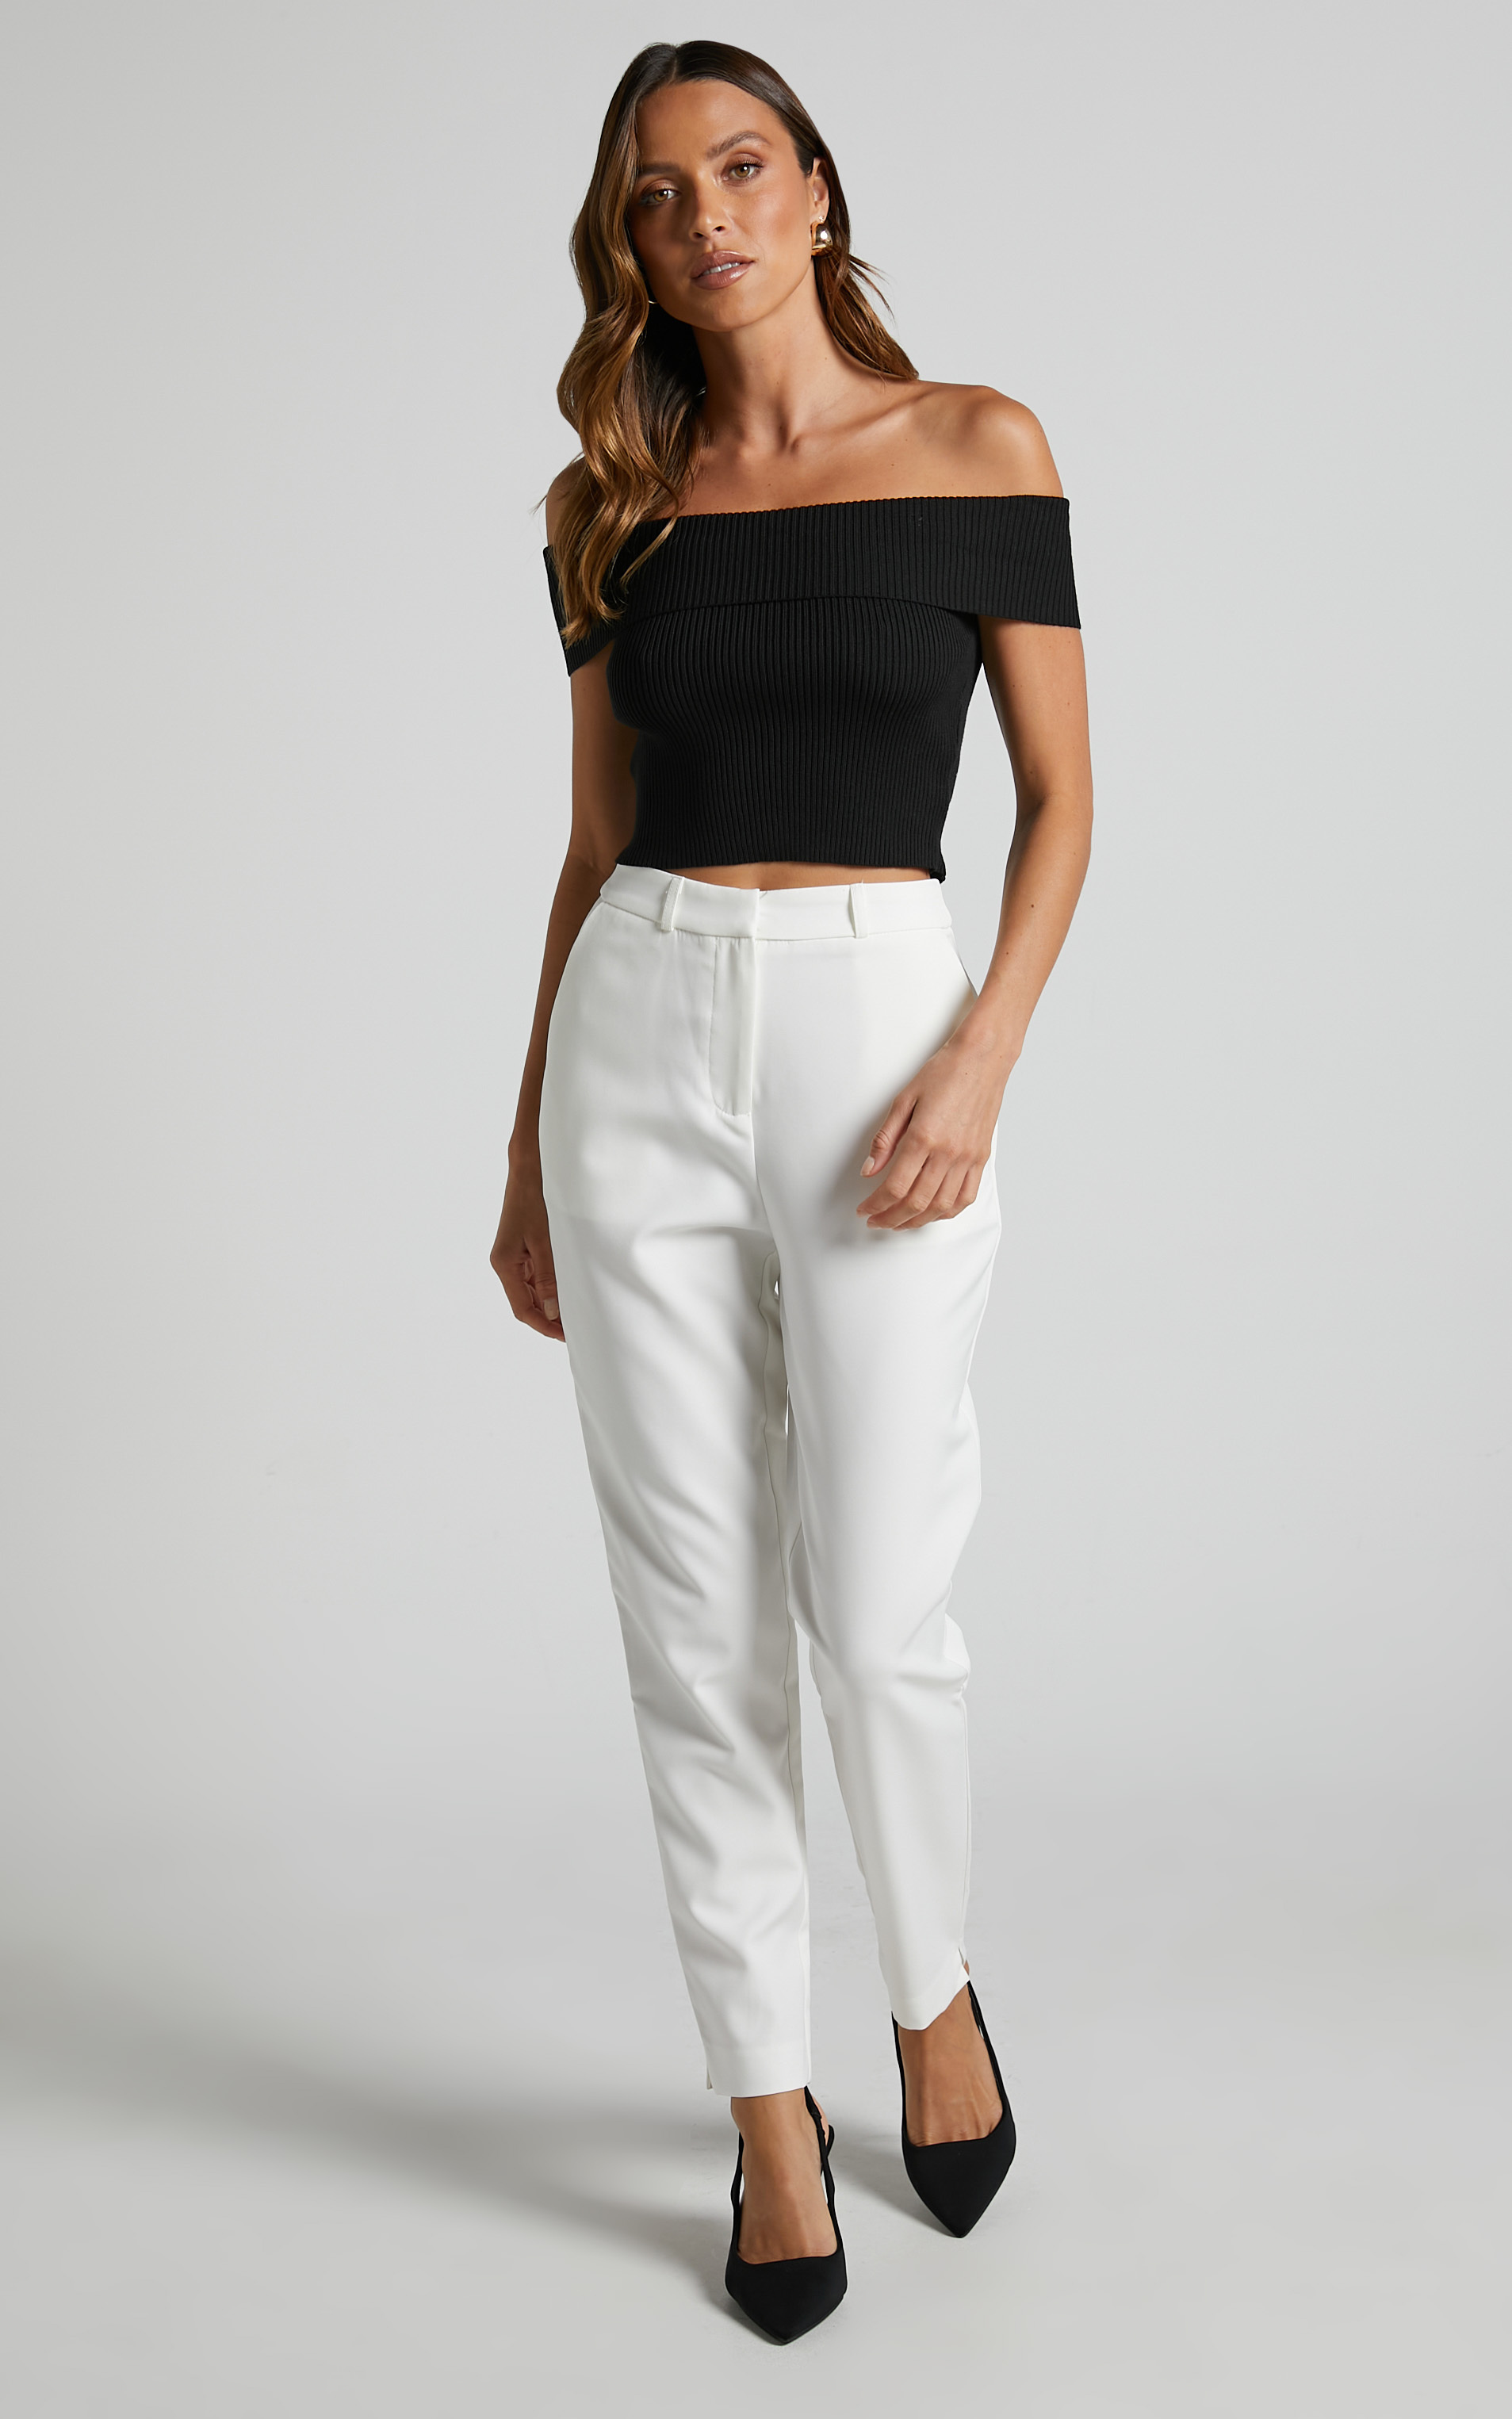 Hermie Pants - Cropped Tailored Pants in White - 04, WHT2, hi-res image number null